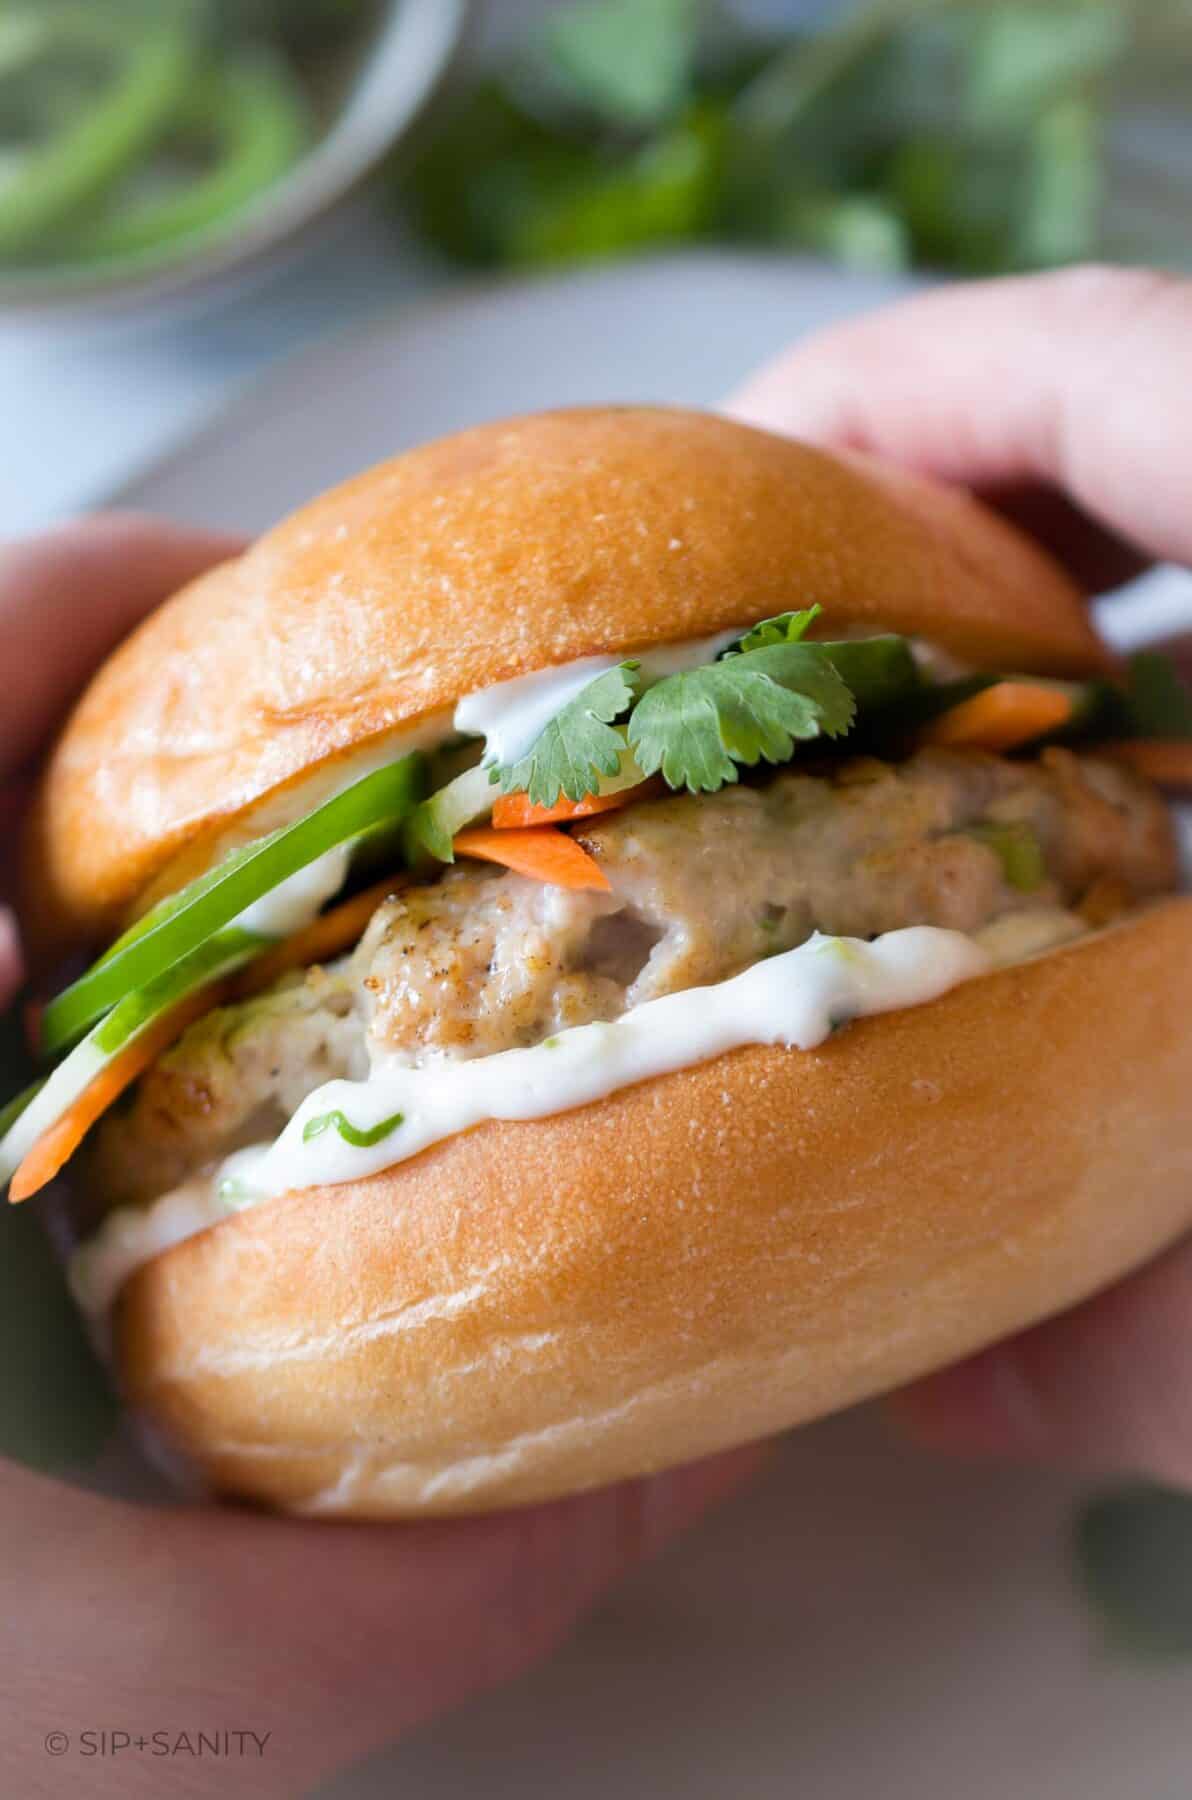 Two hands holding a banh mi chicken burger with scallion mayo.